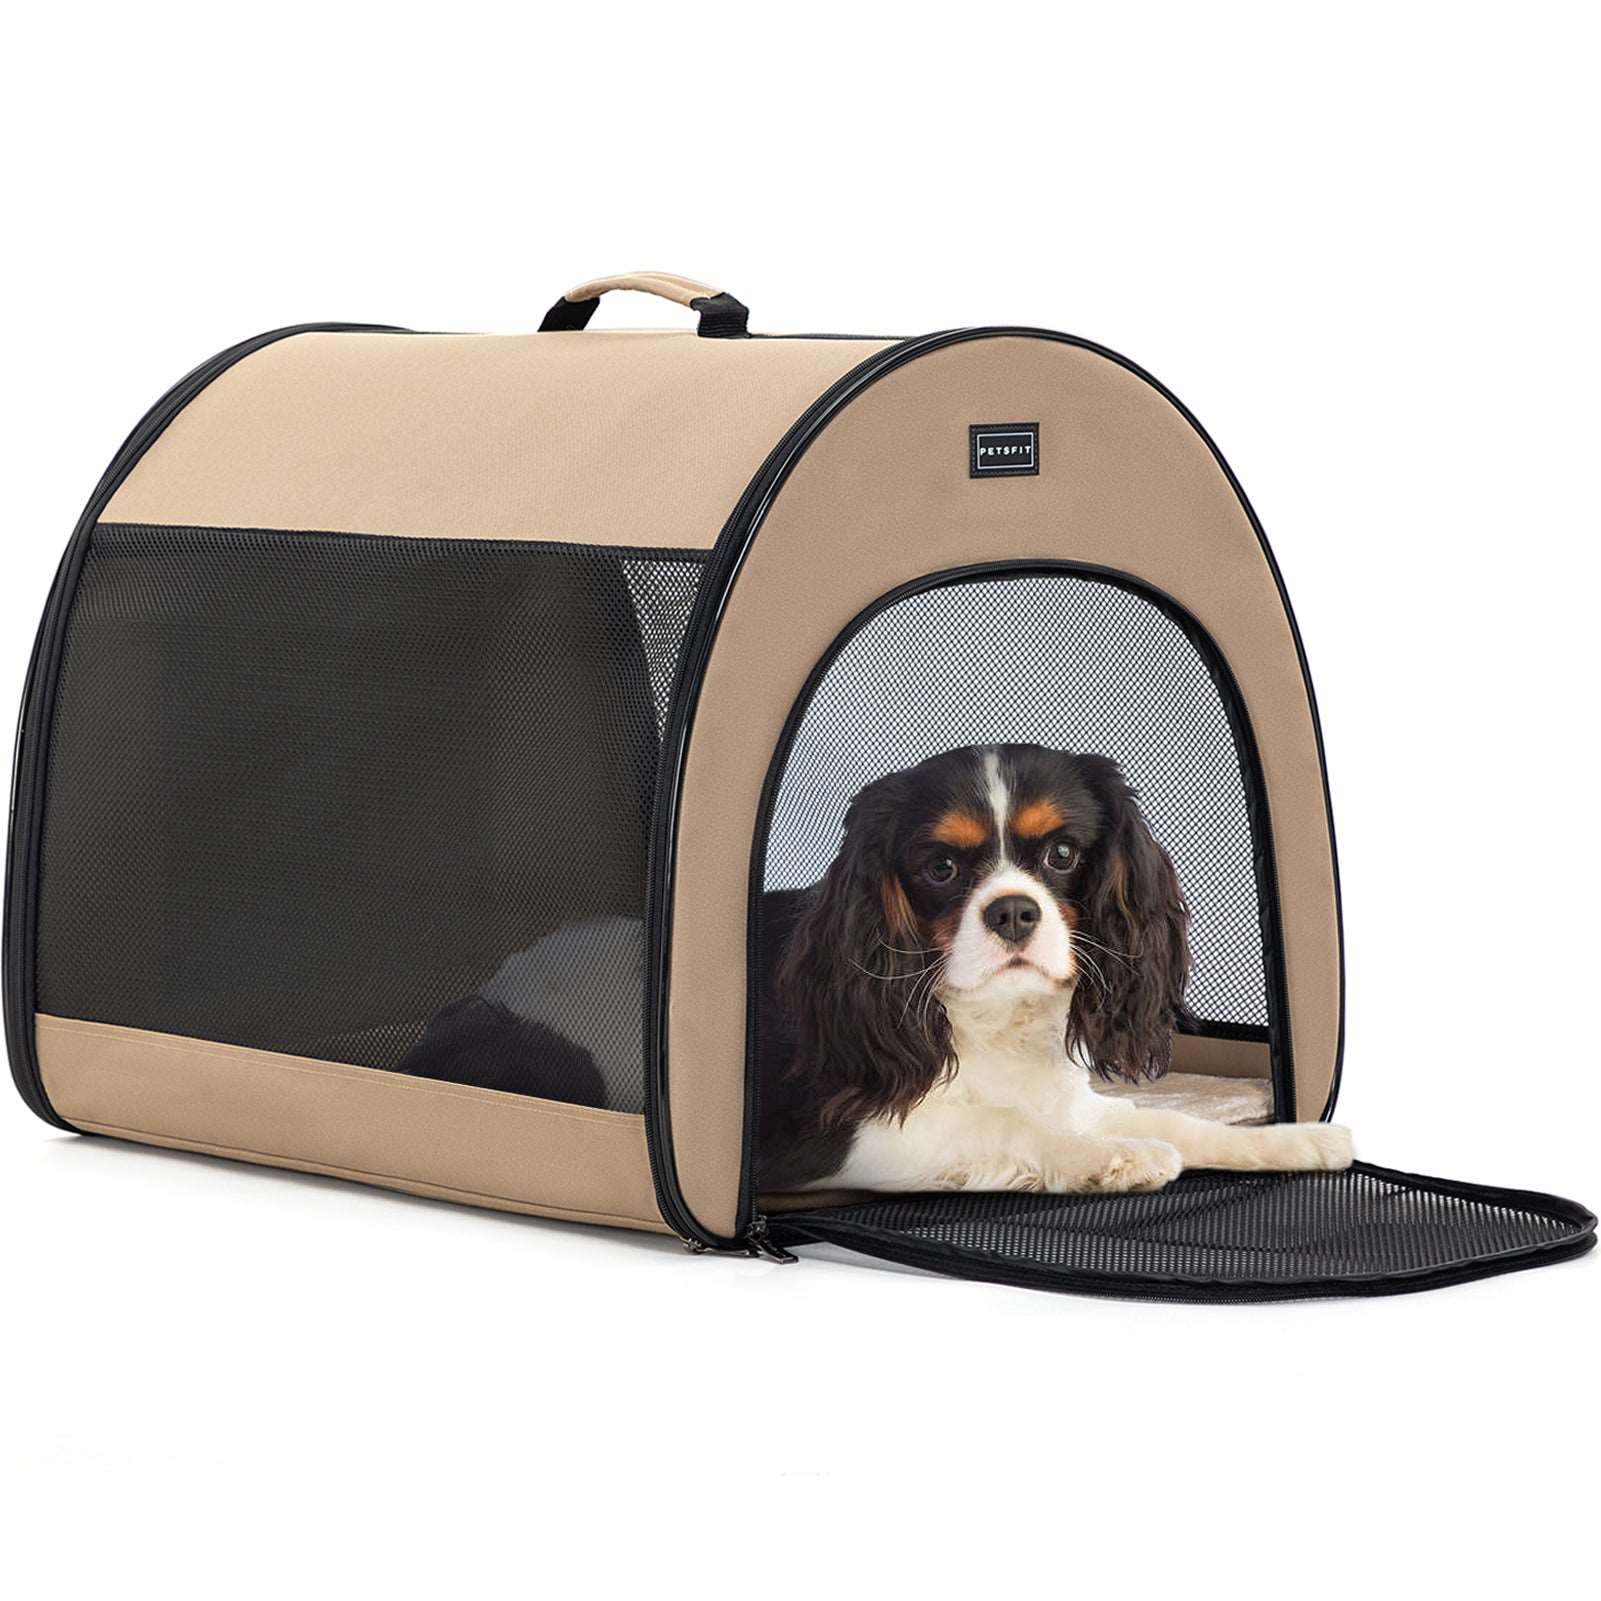 Petsfit-Arch-Design-Soft-Sided-Portable-Dog-Crate-12